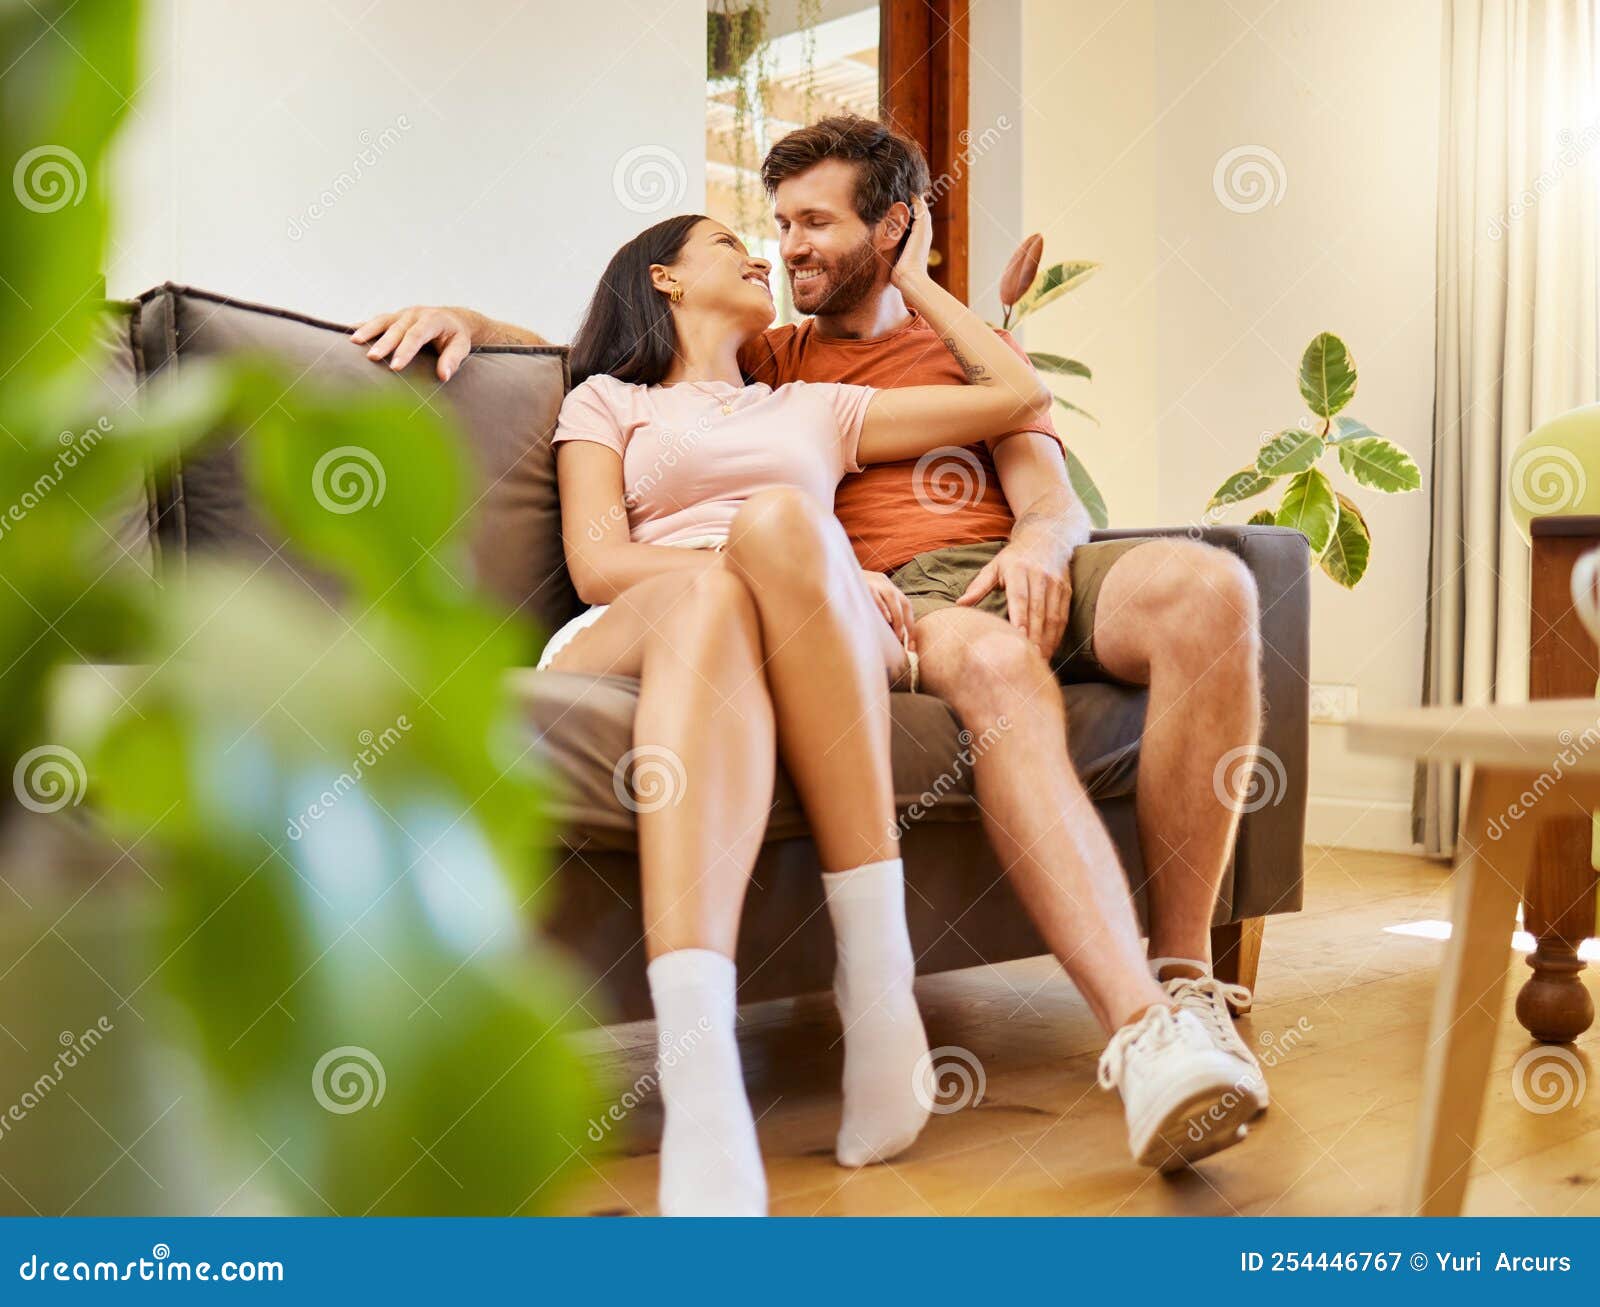 Happy, Romance and Couple Relax Indoors Together, Bonding and Talking on Sofa Together picture